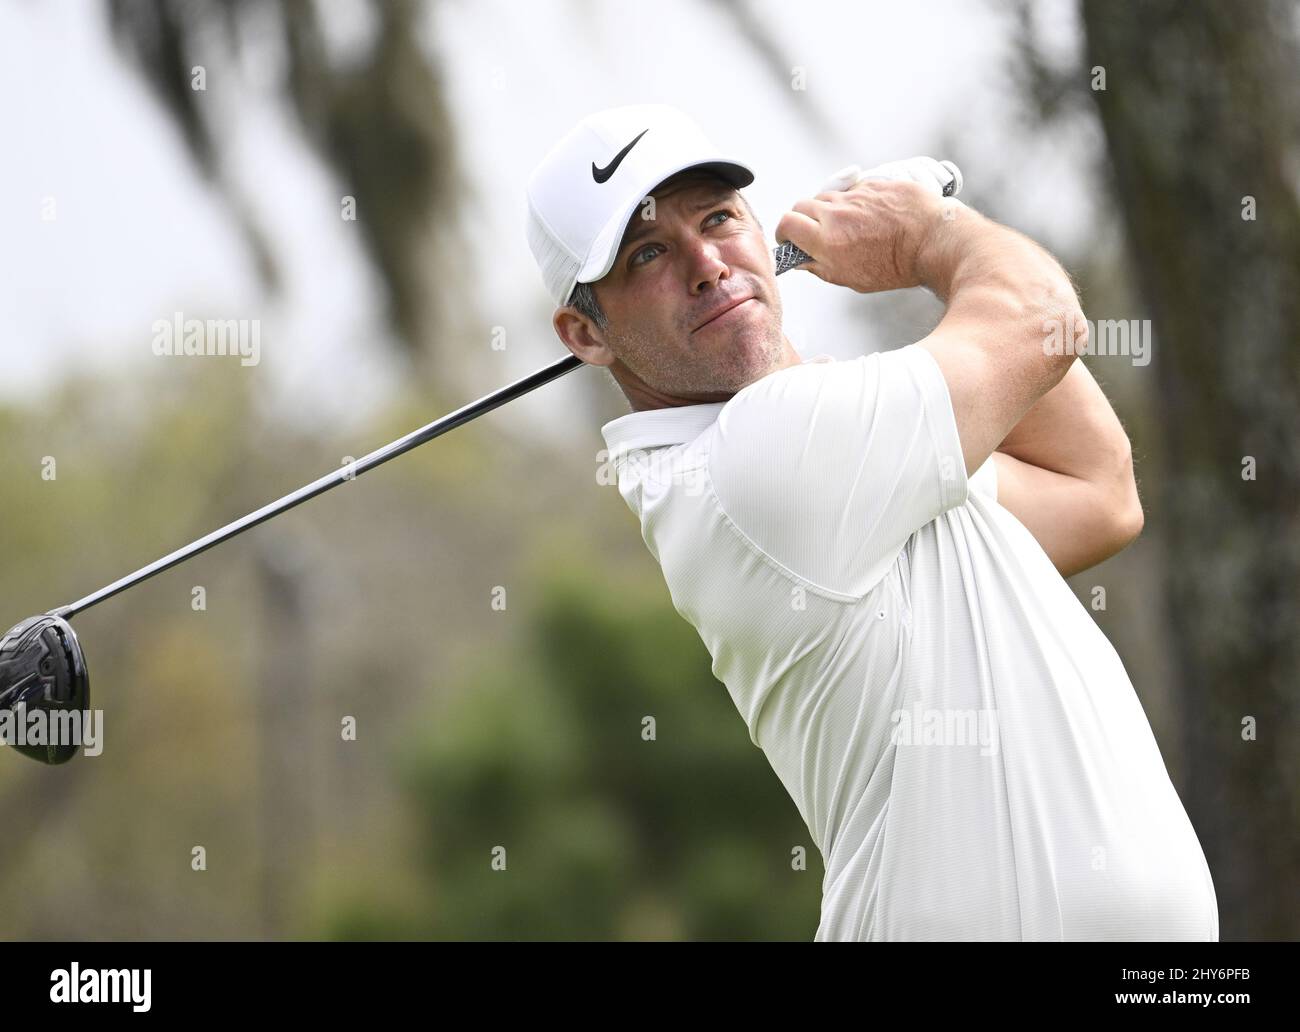 Ponte Vedra Beach, United States. 14th Mar, 2022. Paul Casey of England hits his tee shot on the 9th hole in the final round of the 2022 Players PGA Championship on the Stadium Course at TPC Sawgrass in Ponte Vedra Beach, Florida on Monday, March 14, 2022. Cameron Smith of Australia won the championship with a score of 13 under par. Photo by Joe Marino/UPI Credit: UPI/Alamy Live News Stock Photo